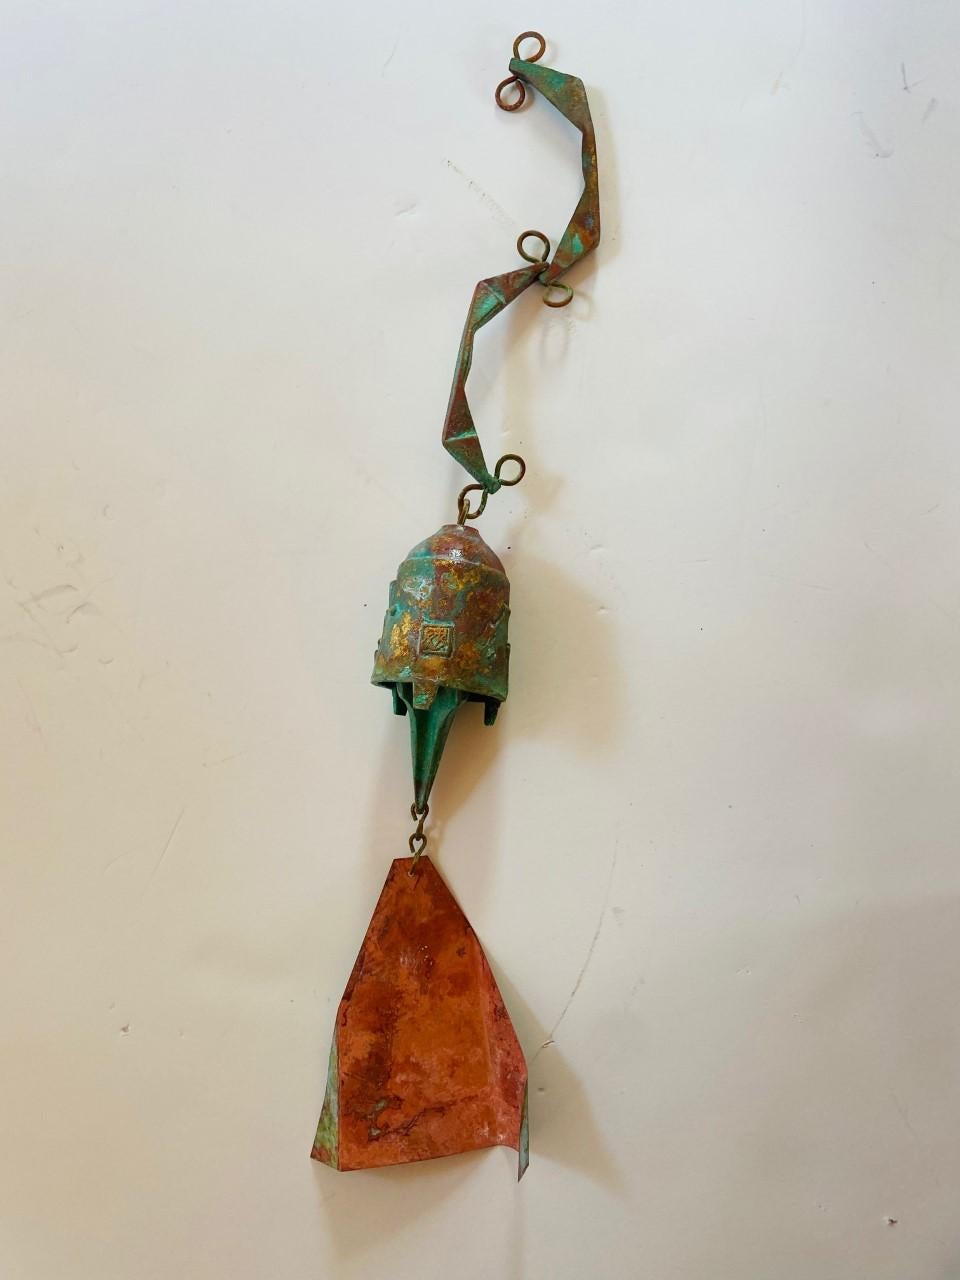 Beautiful bronze Cosanti bell by Paolo Soleri. Uncommon shape and design. Fantastic patina and a great sound. Signed. A unique piece from a celebrated artist. Unique attribute to this piece is a bluish green and rust color patina.

Paolo Soleri